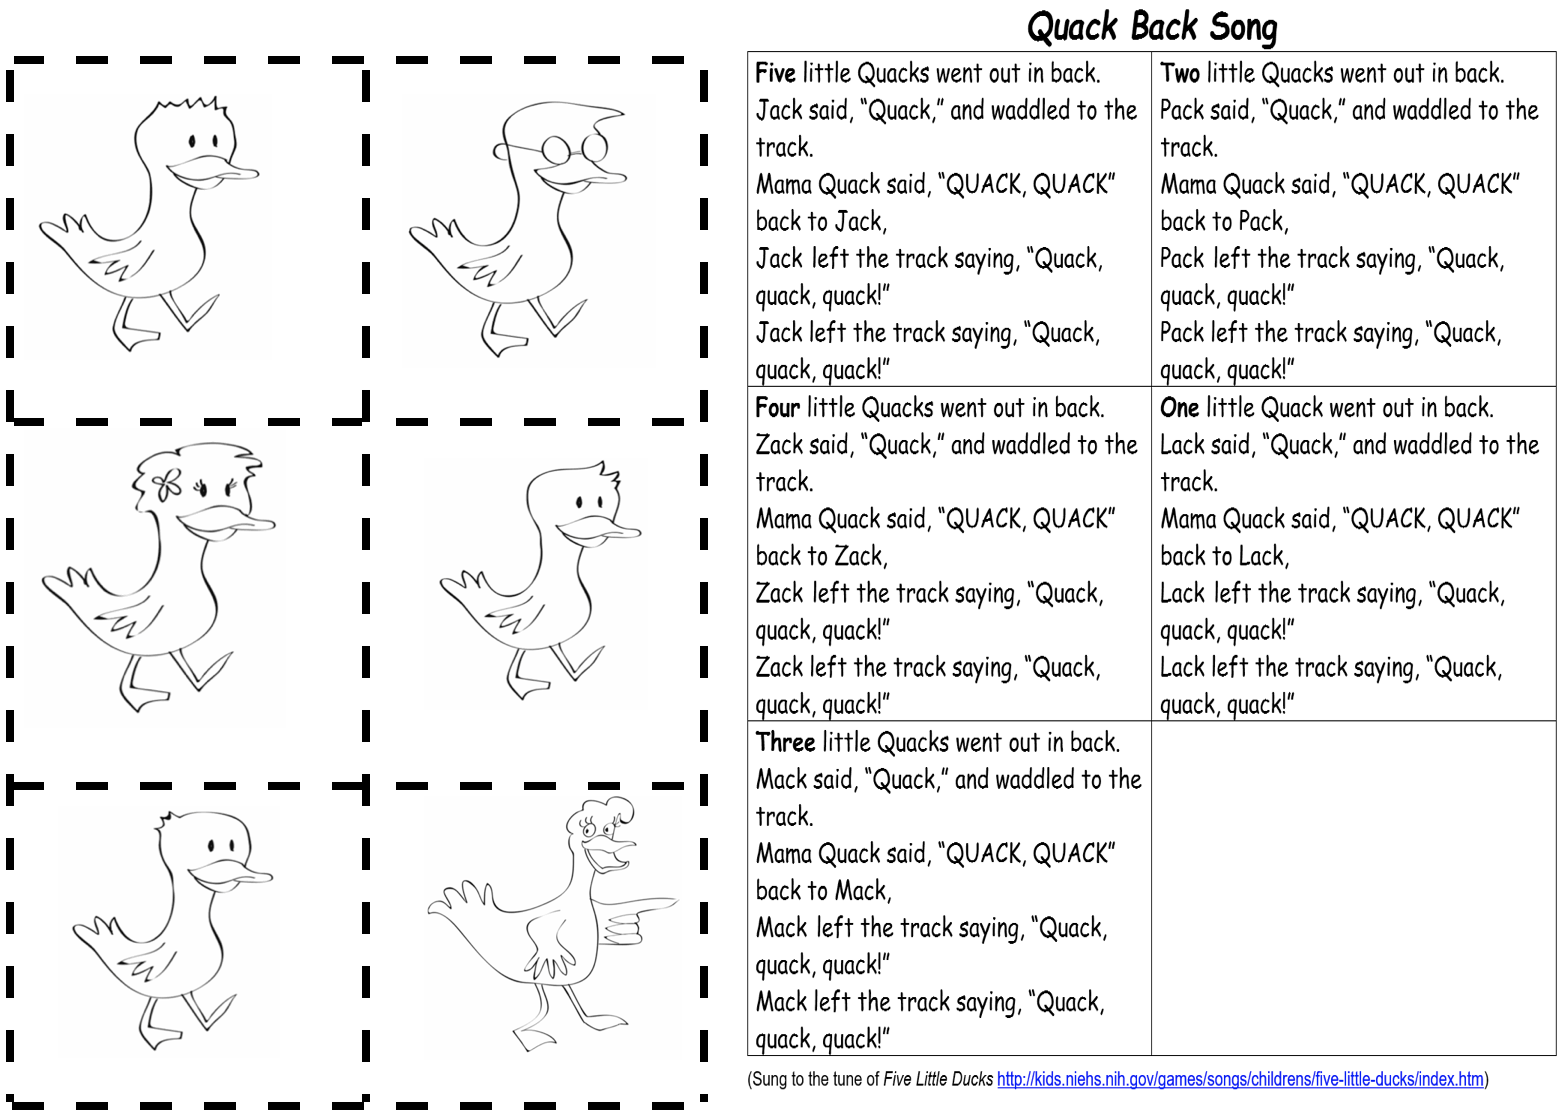 quack-back-song-and-graphics